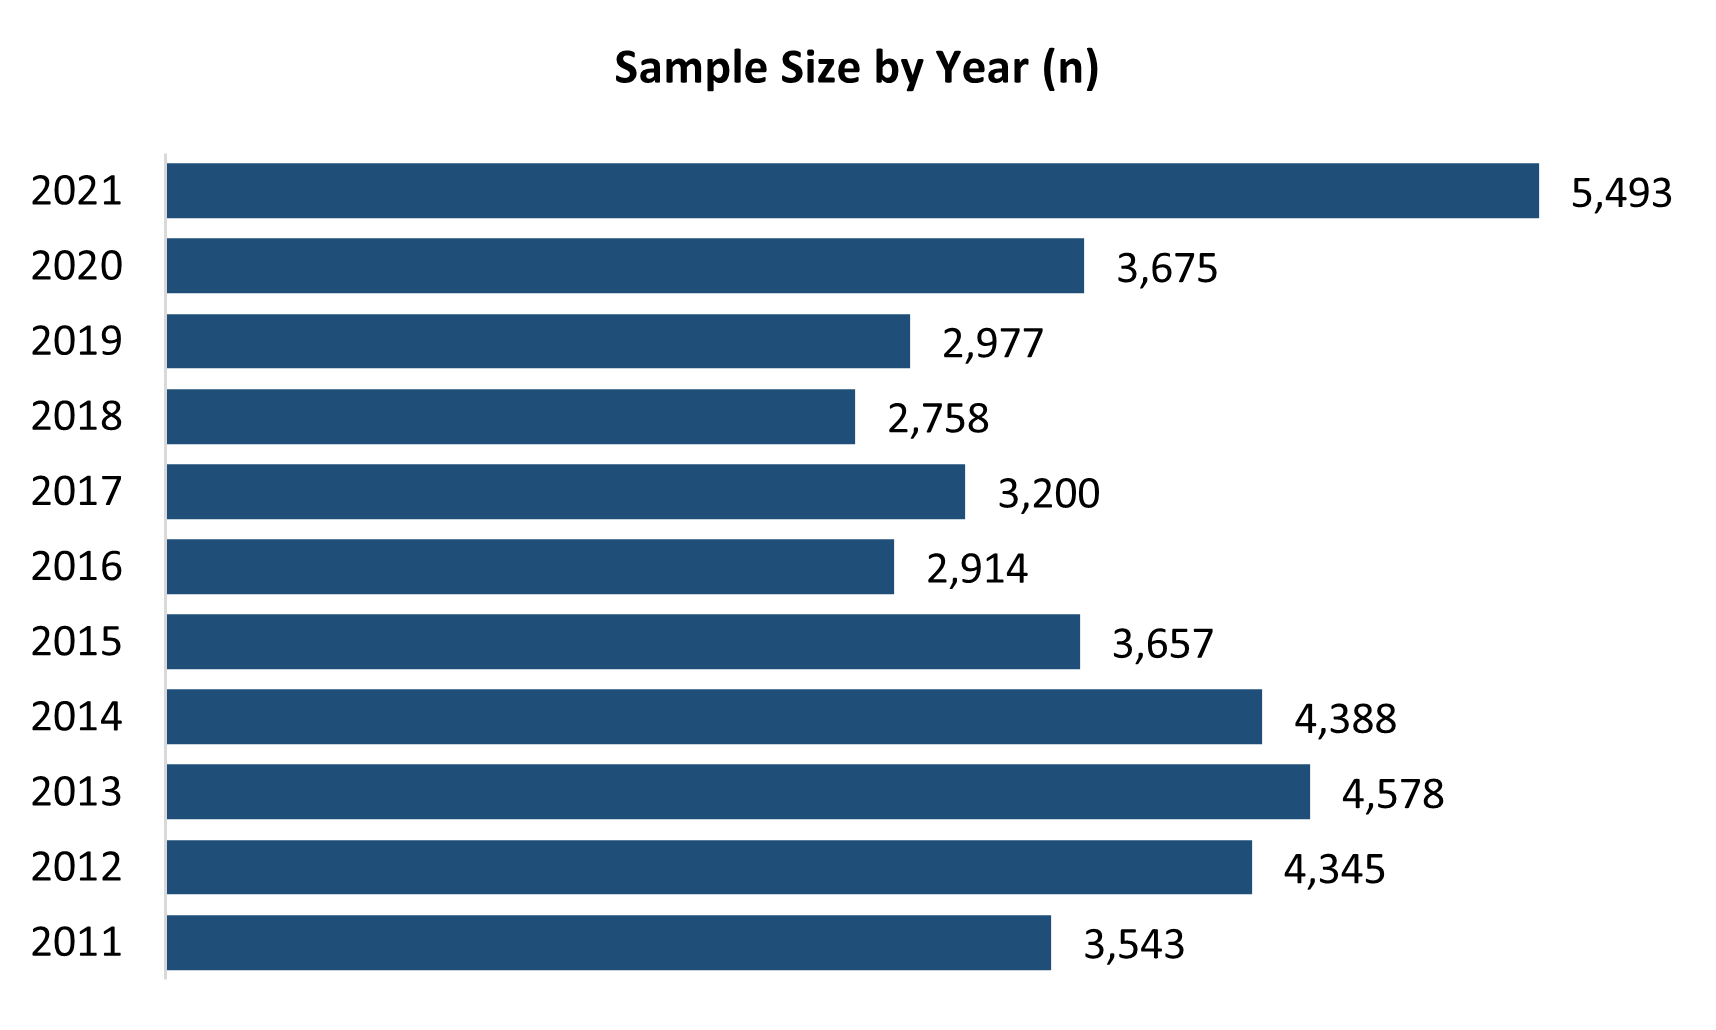 Sample size by year(n):2021=5,493;2020=3,675;2019=2,977;2018=2,758;2017=3,200;2016=2,914;2015=3,657;2014=4,388;2013=4,578;2012=4,345;2011=3,543